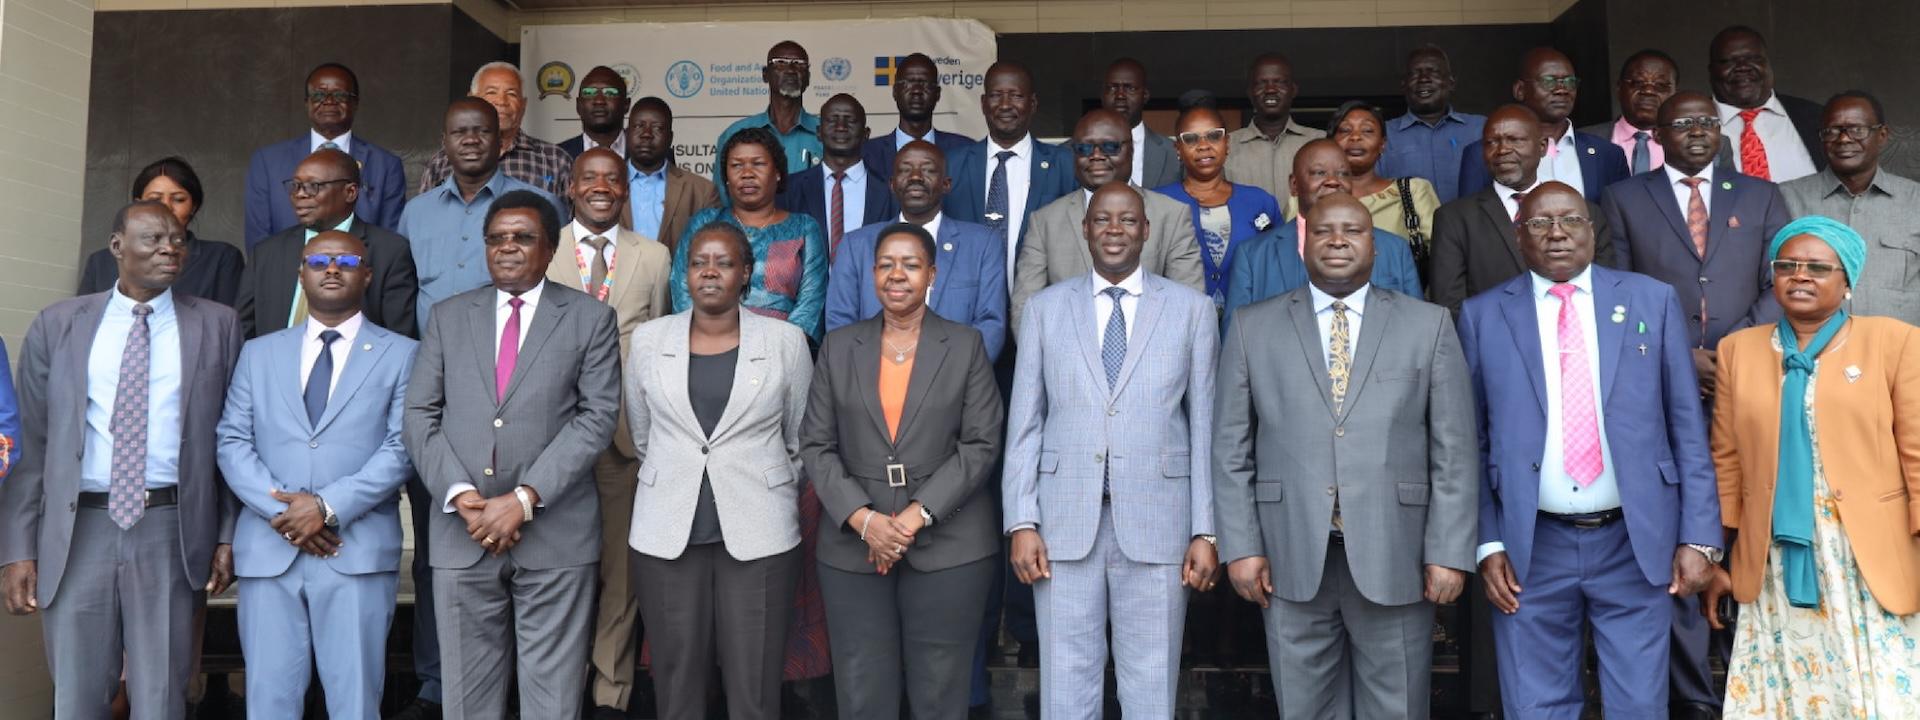 Building consensus towards an inclusive National Land Policy in South Sudan